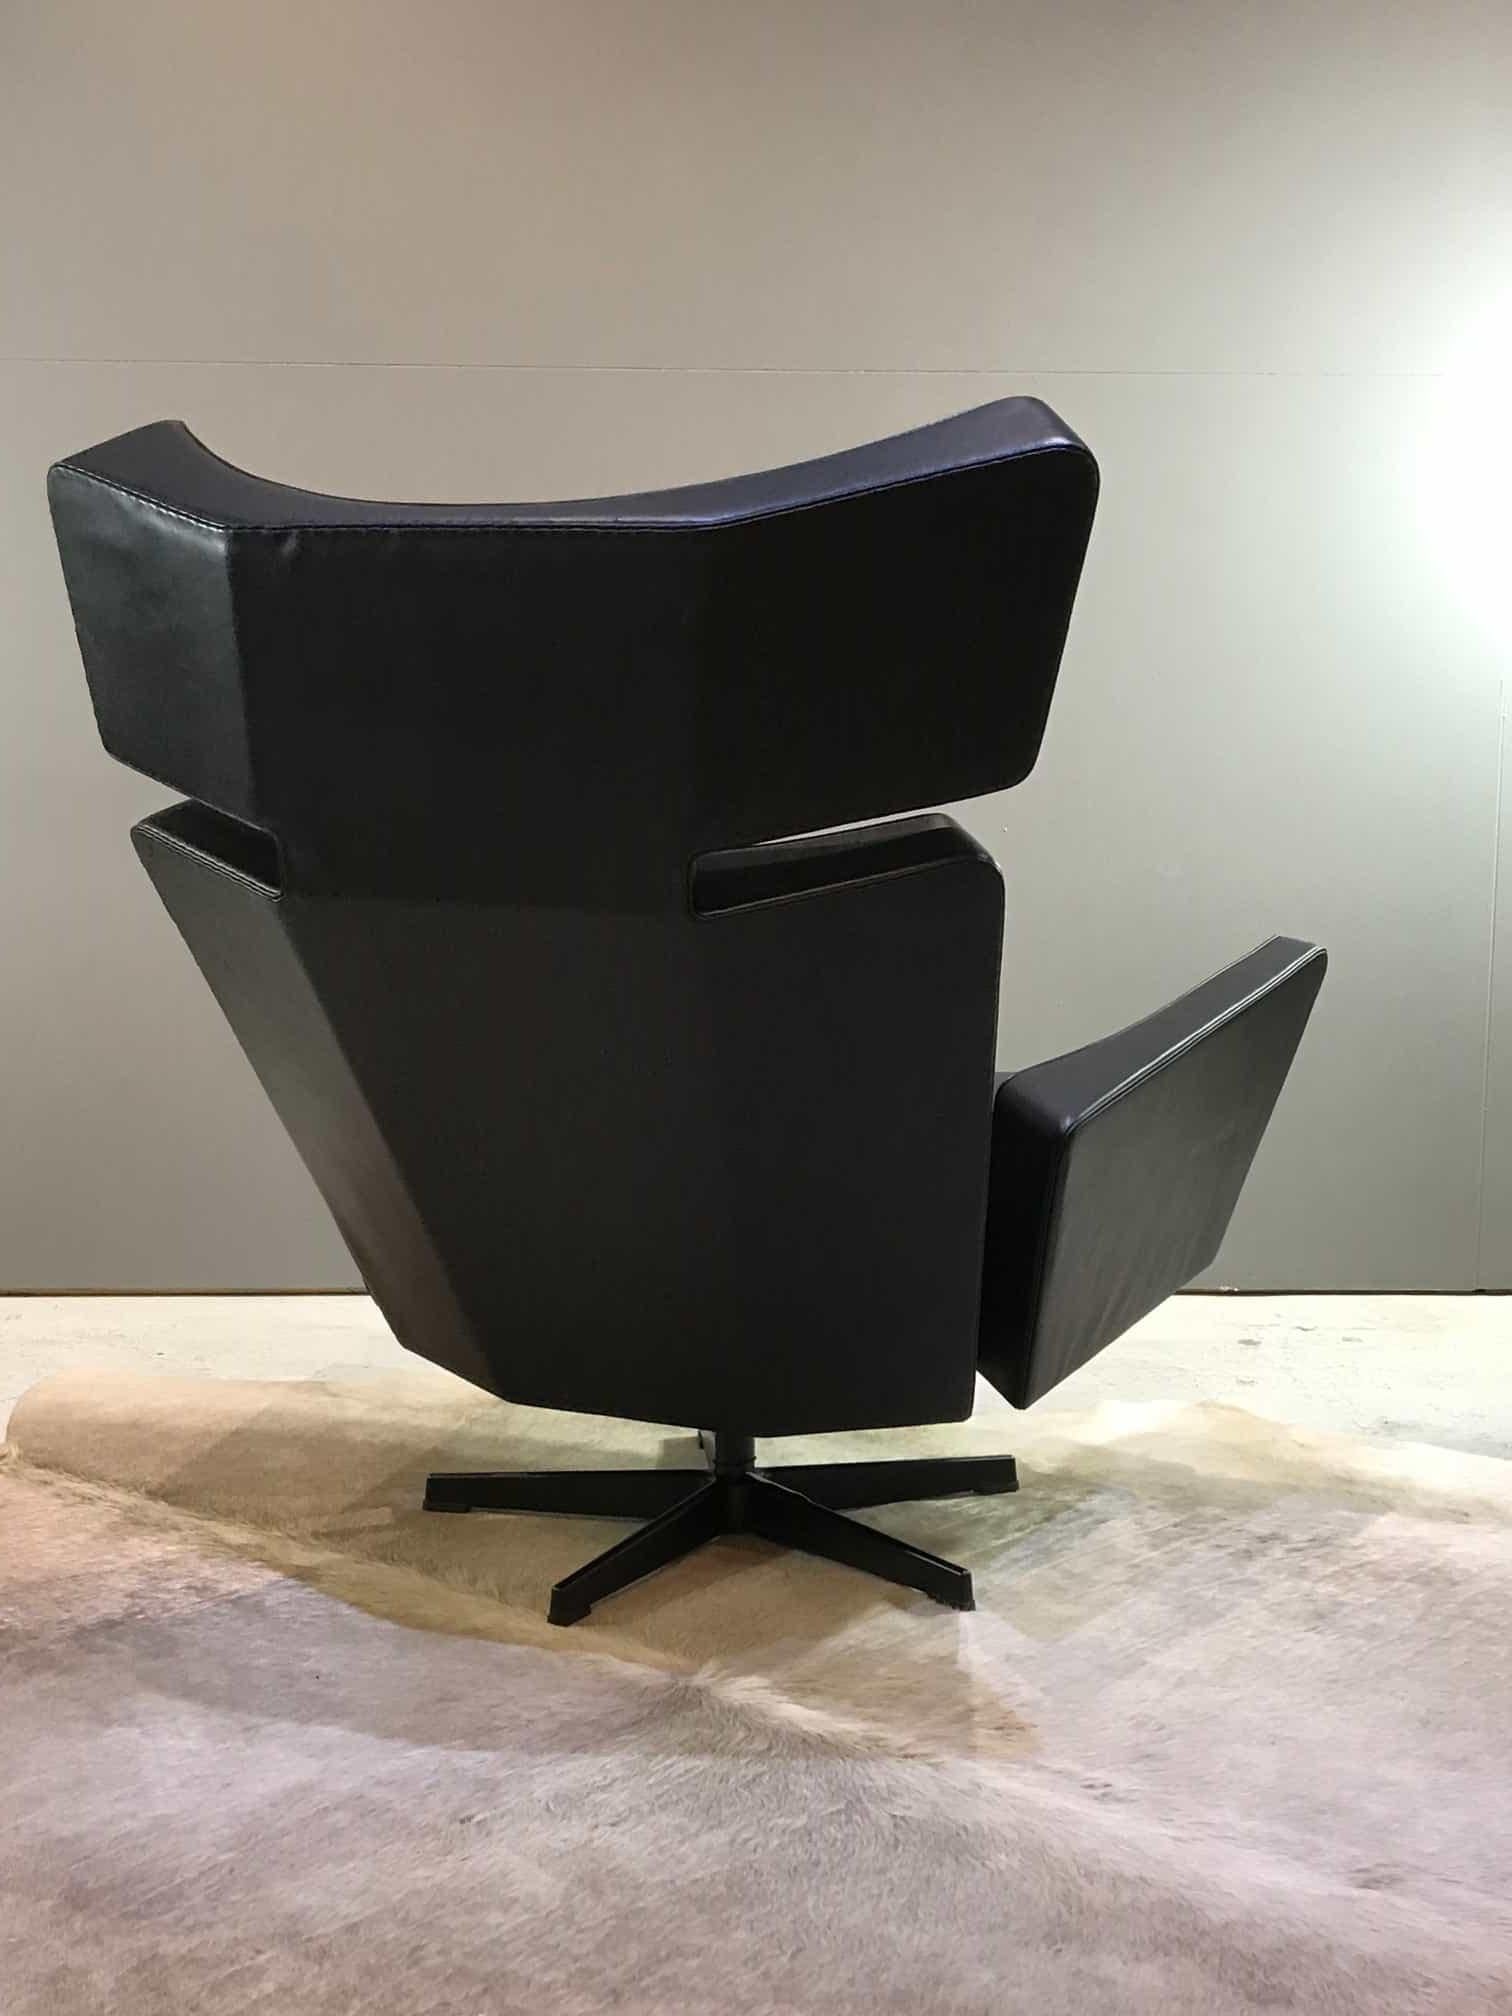 Midcentury Black Leather Lounge Chair by Arne Jacobsen Oksen, Ox Chair For Sale 6